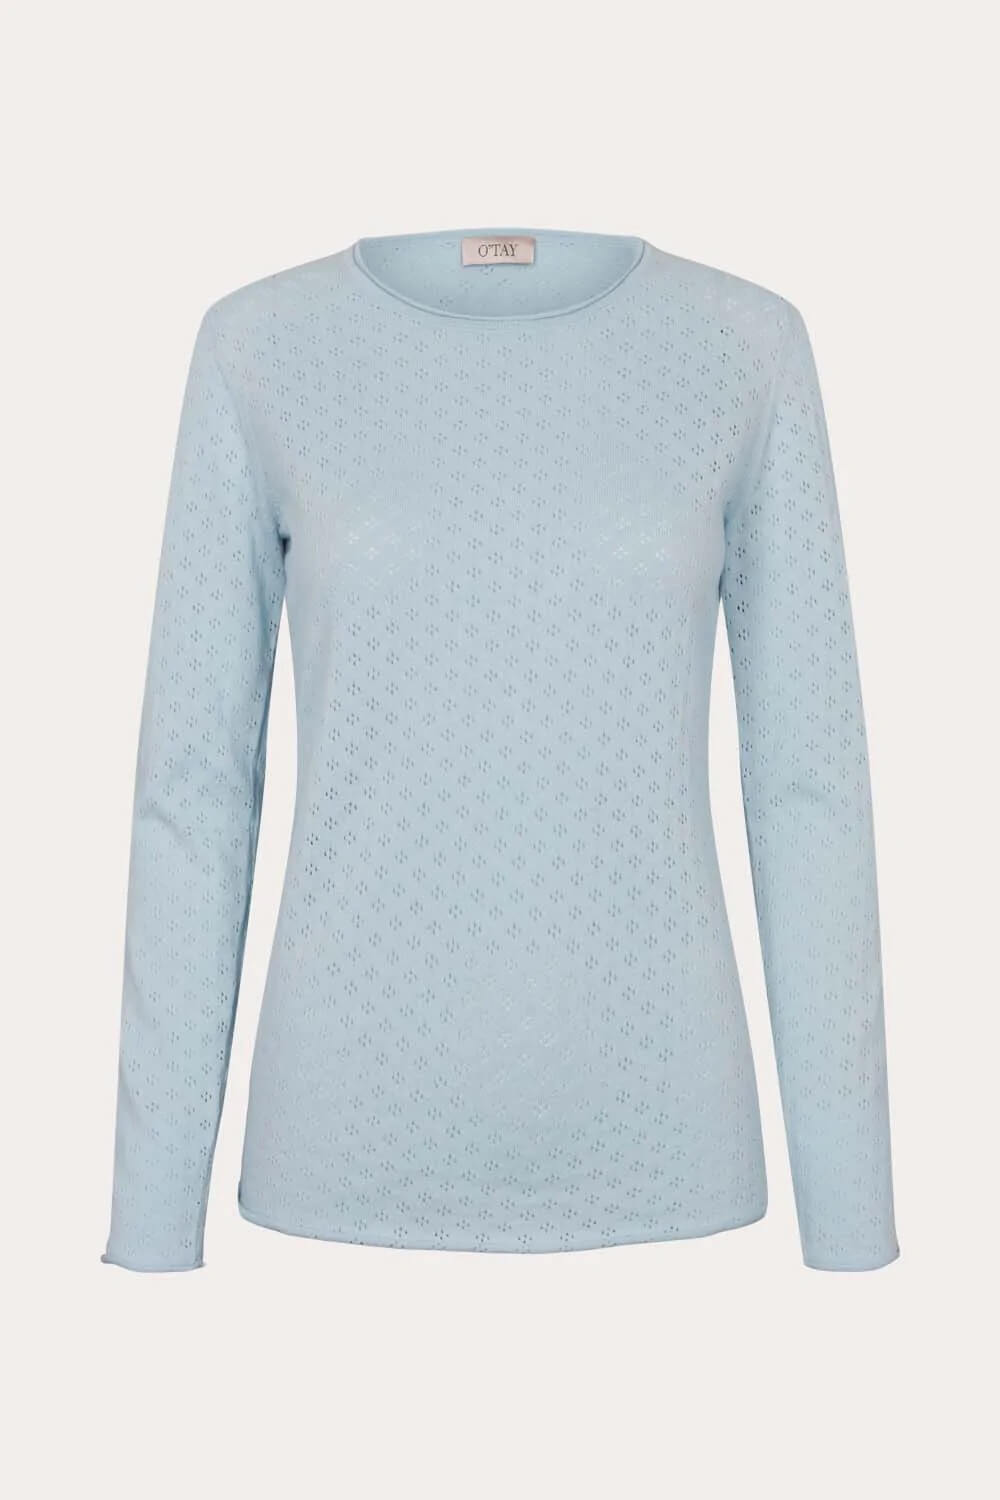 O'TAY Phoebe Blouse Bluser Baby Blue